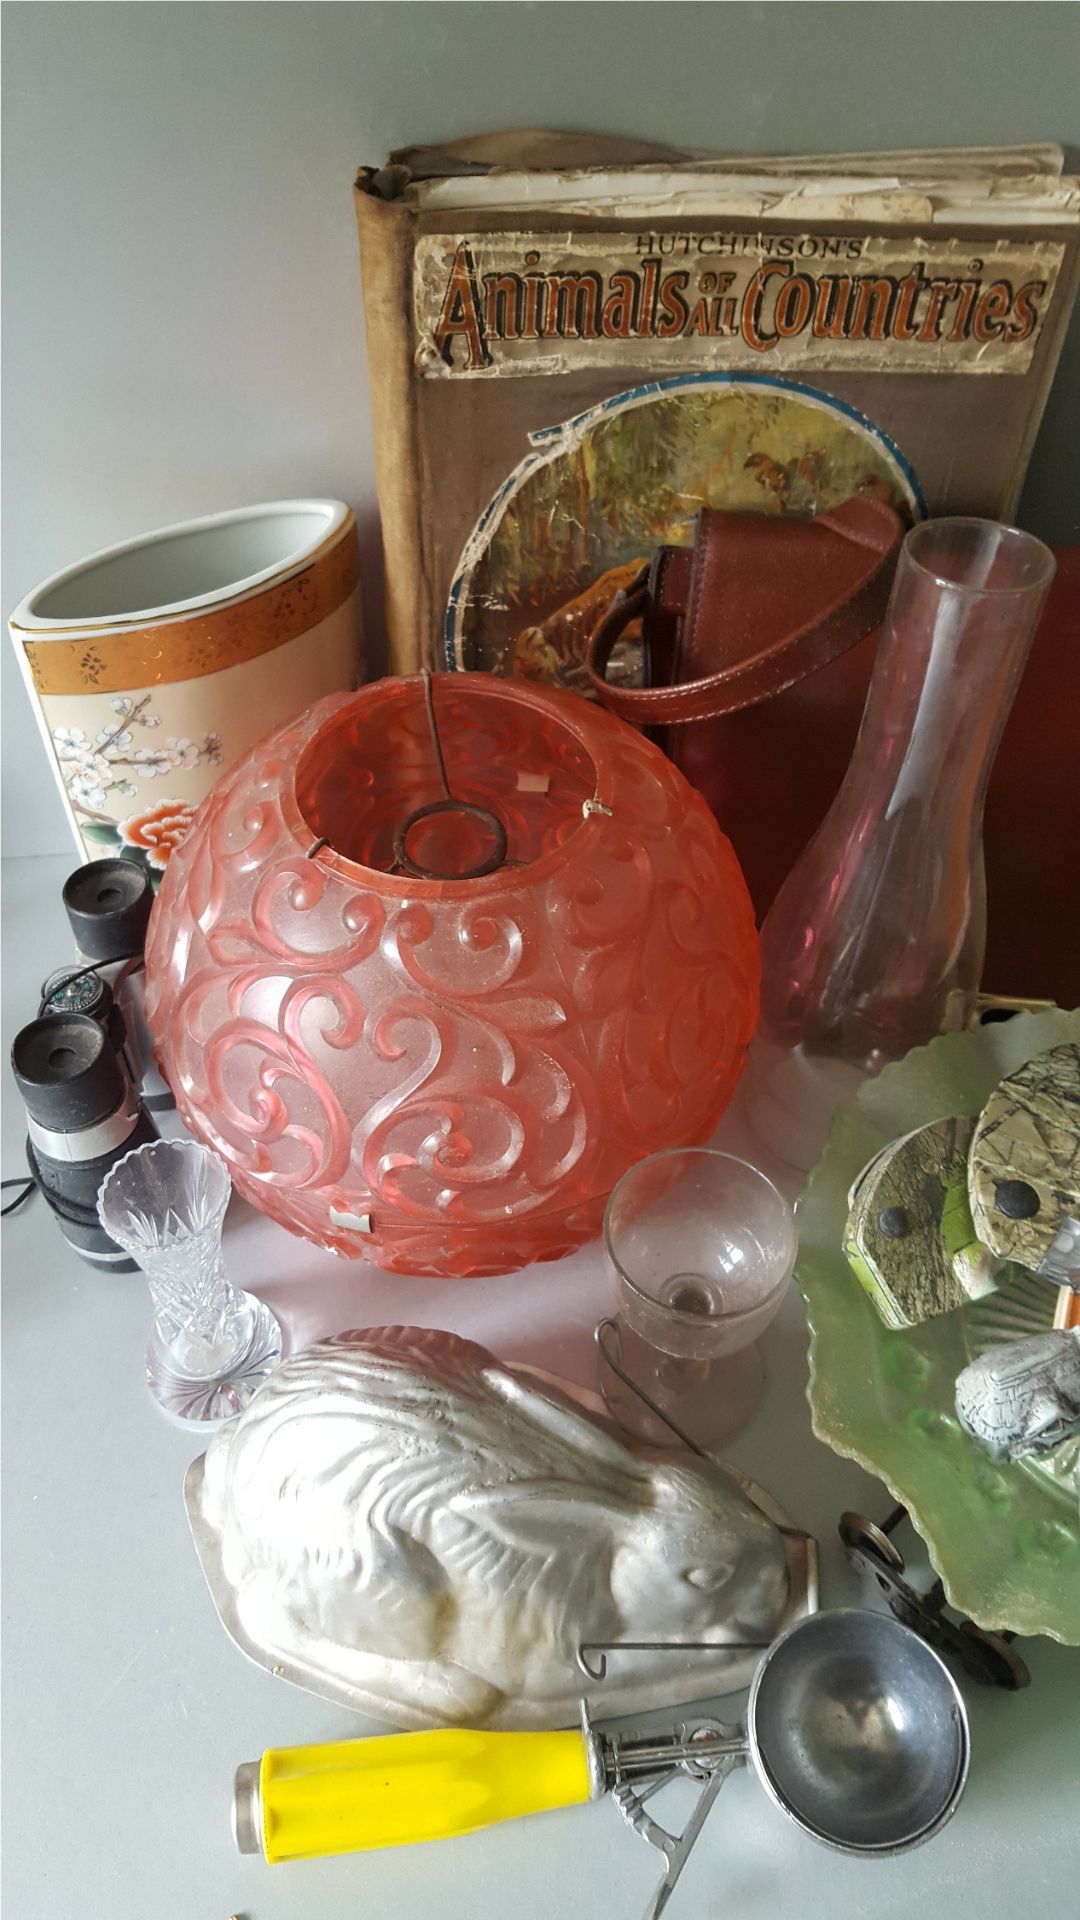 Vintage Retro Parcel Items Includes Lighting Jelly Mould Cake Stand Bags Books Etc. NO RESERVE - Image 2 of 3